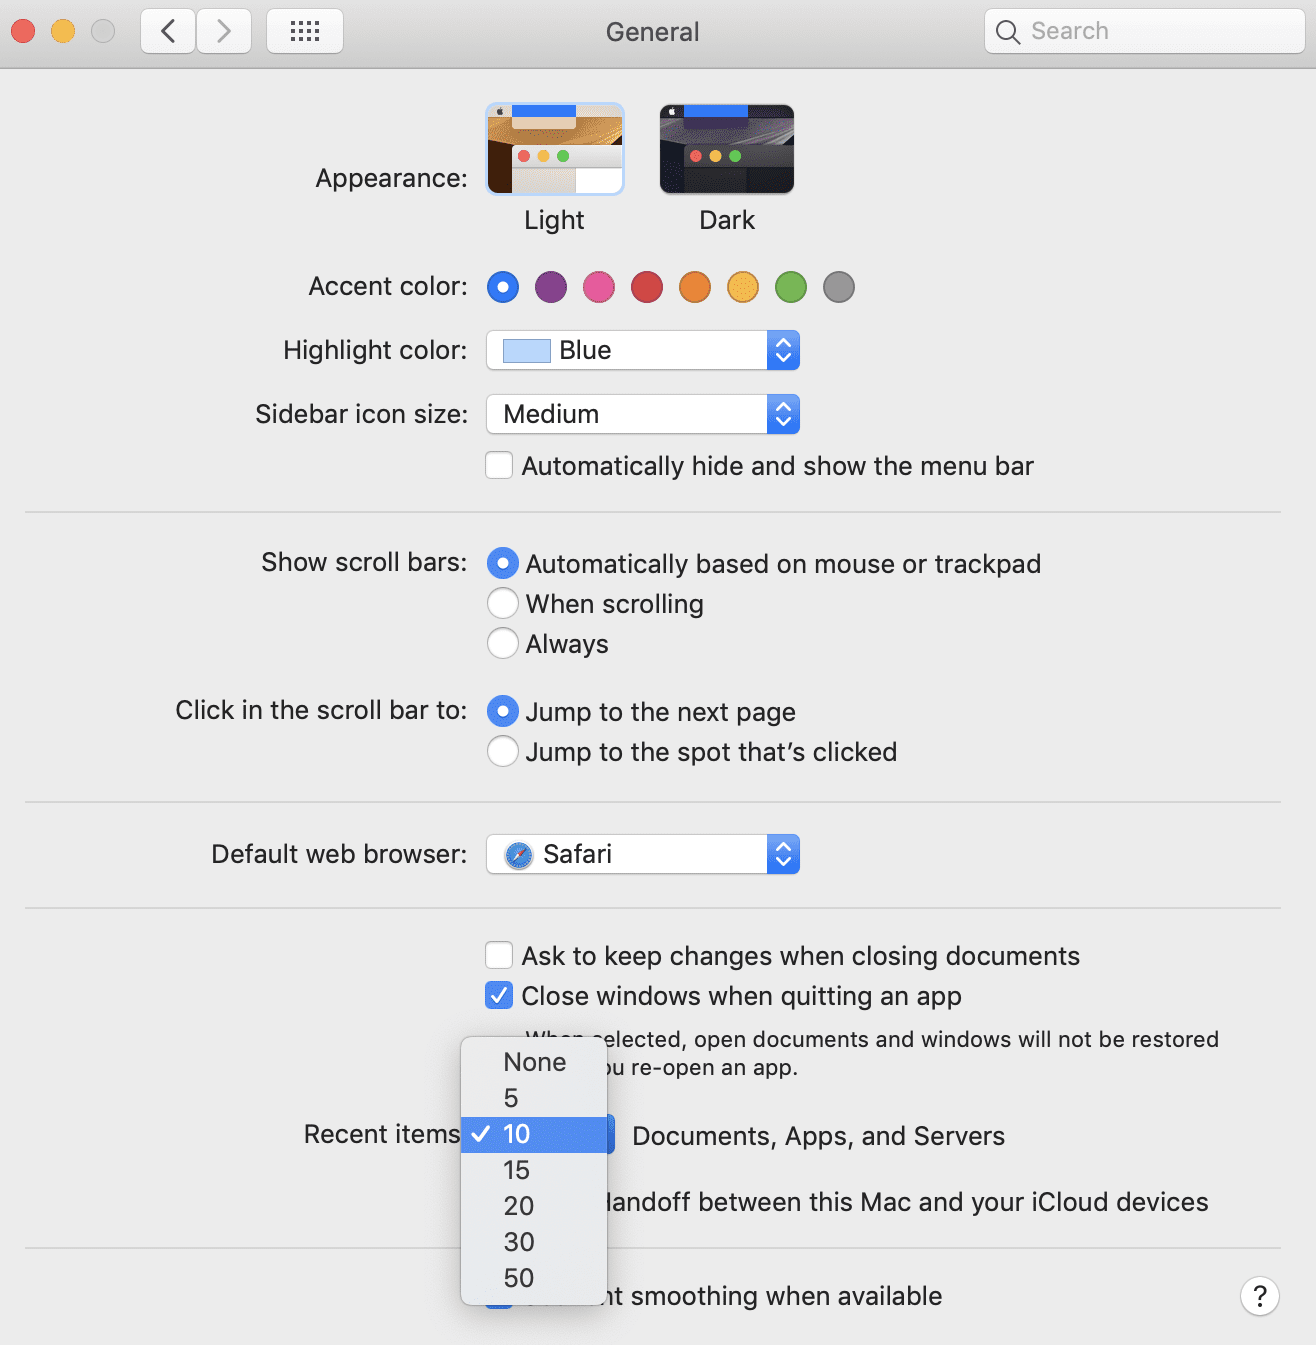 The Recent Items popup menu in System Preferences > General provides a selection of numbers of items to view